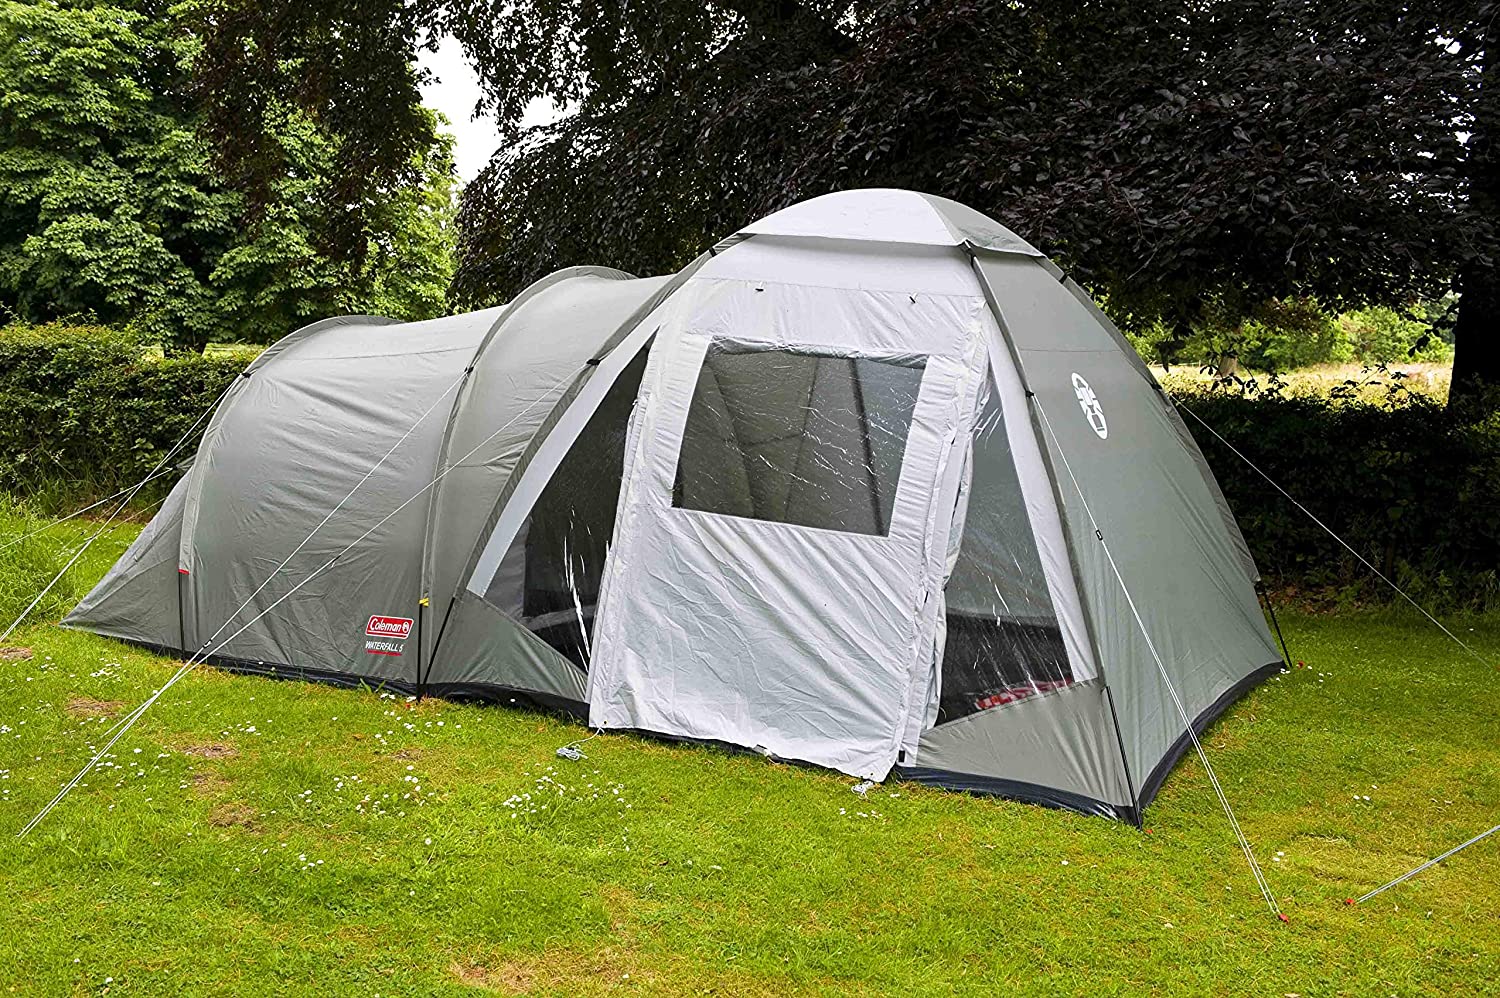 Best budget family tent – Top 5 budget tents for families